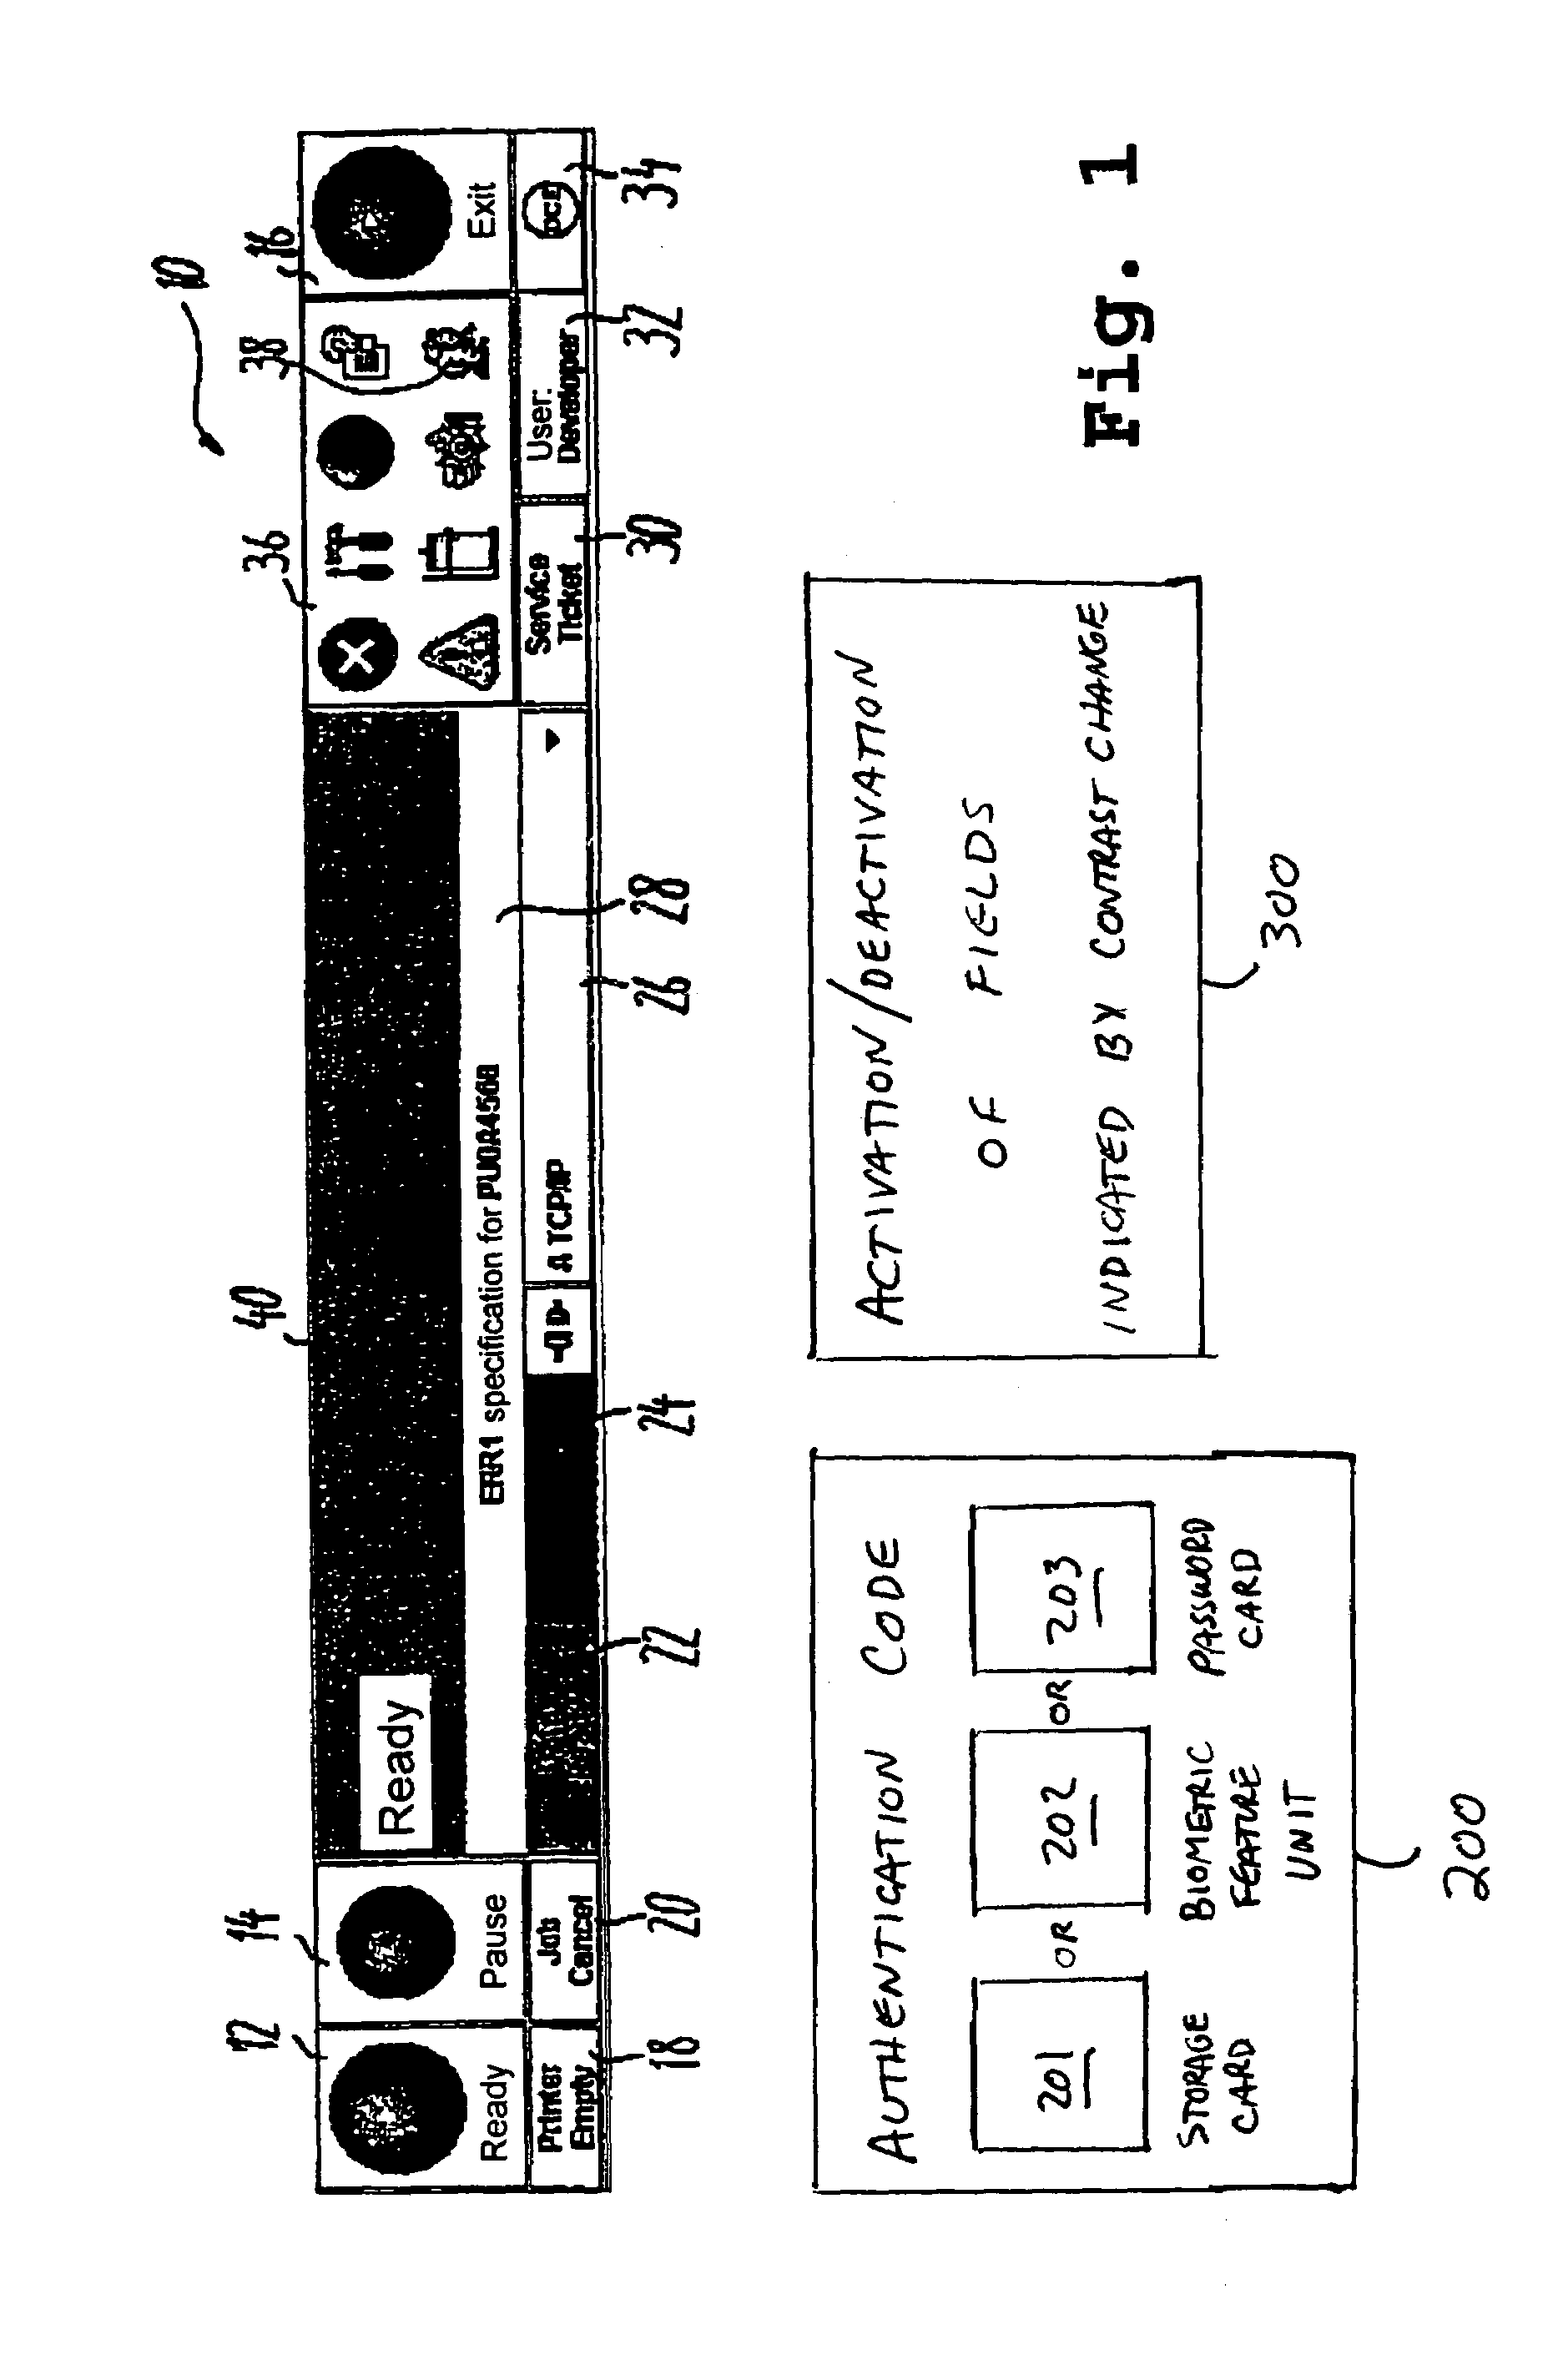 Operating unit with user accounts for an electro-photographic printing system or copying system